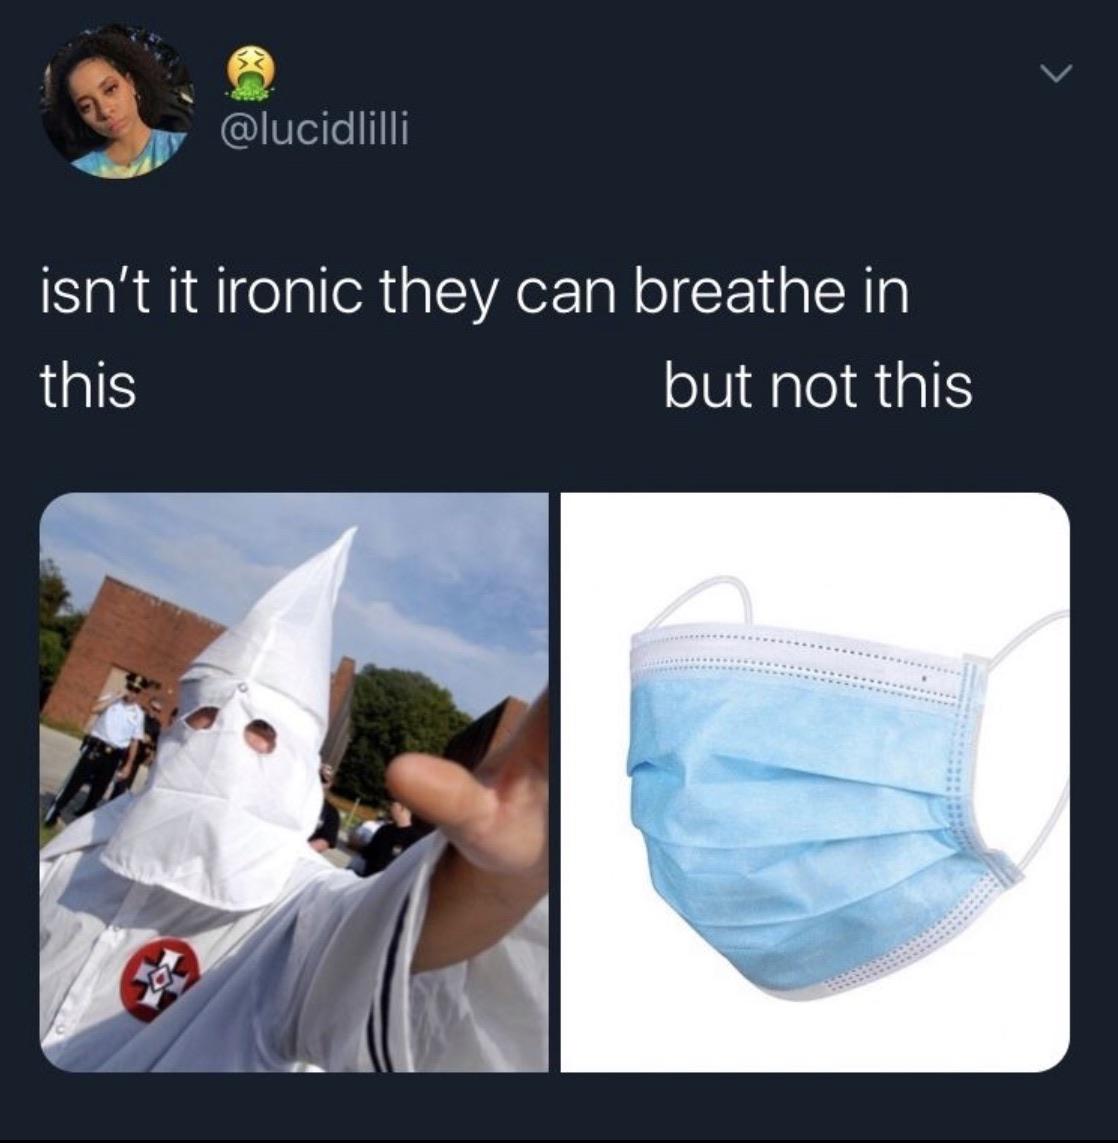 Political, KKK, Venn, Trump, Republican Political Memes Political, KKK, Venn, Trump, Republican text: @lucidlilli isn't it ironic they can breathe in this eøæ but not this 